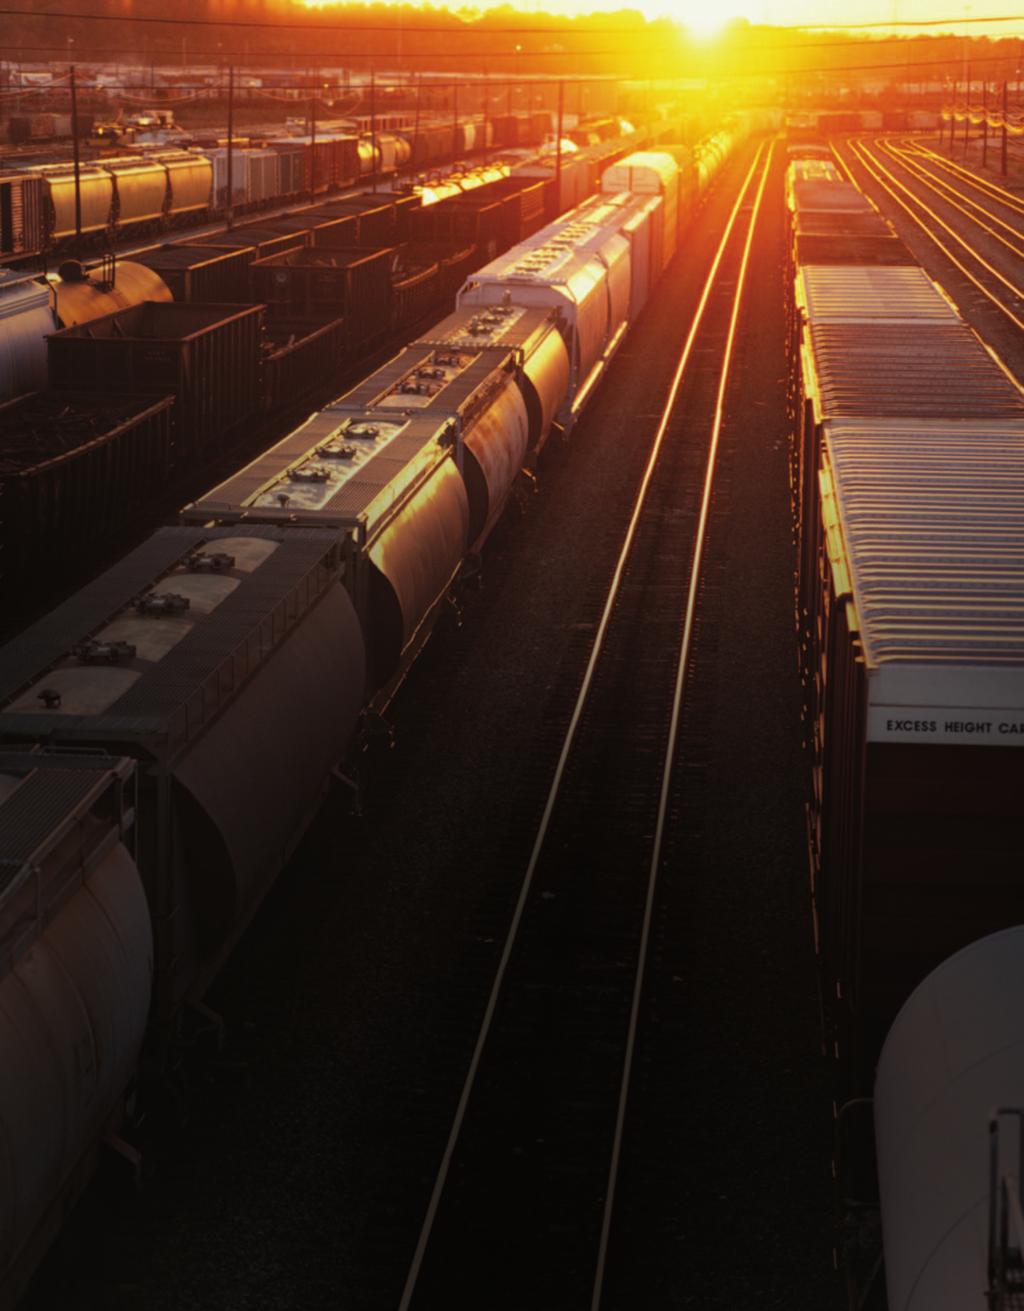 CASE FILE: TRANSPORTATION FASTER BACKHAUL ALONG THE RAILS You are upgrading your rail station video monitoring and transportation control systems.